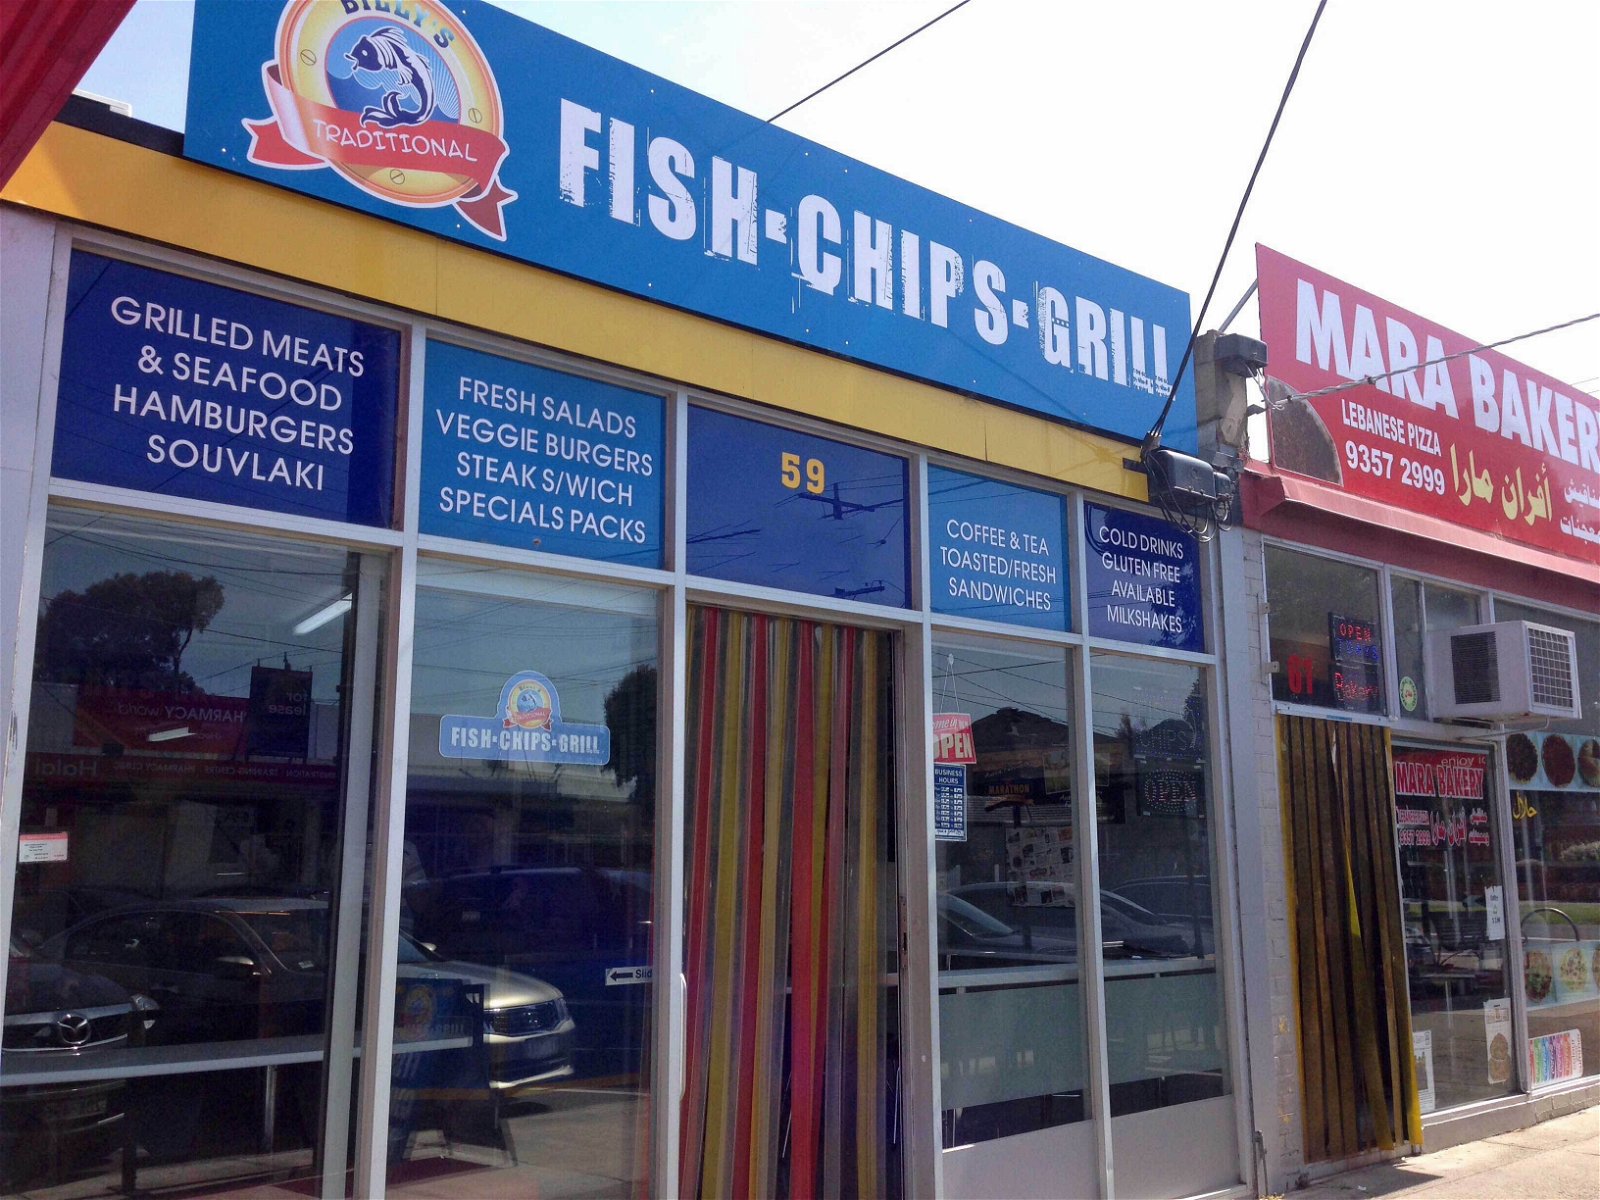 Billy's Traditional Fish Chips Grill - Surfers Paradise Gold Coast